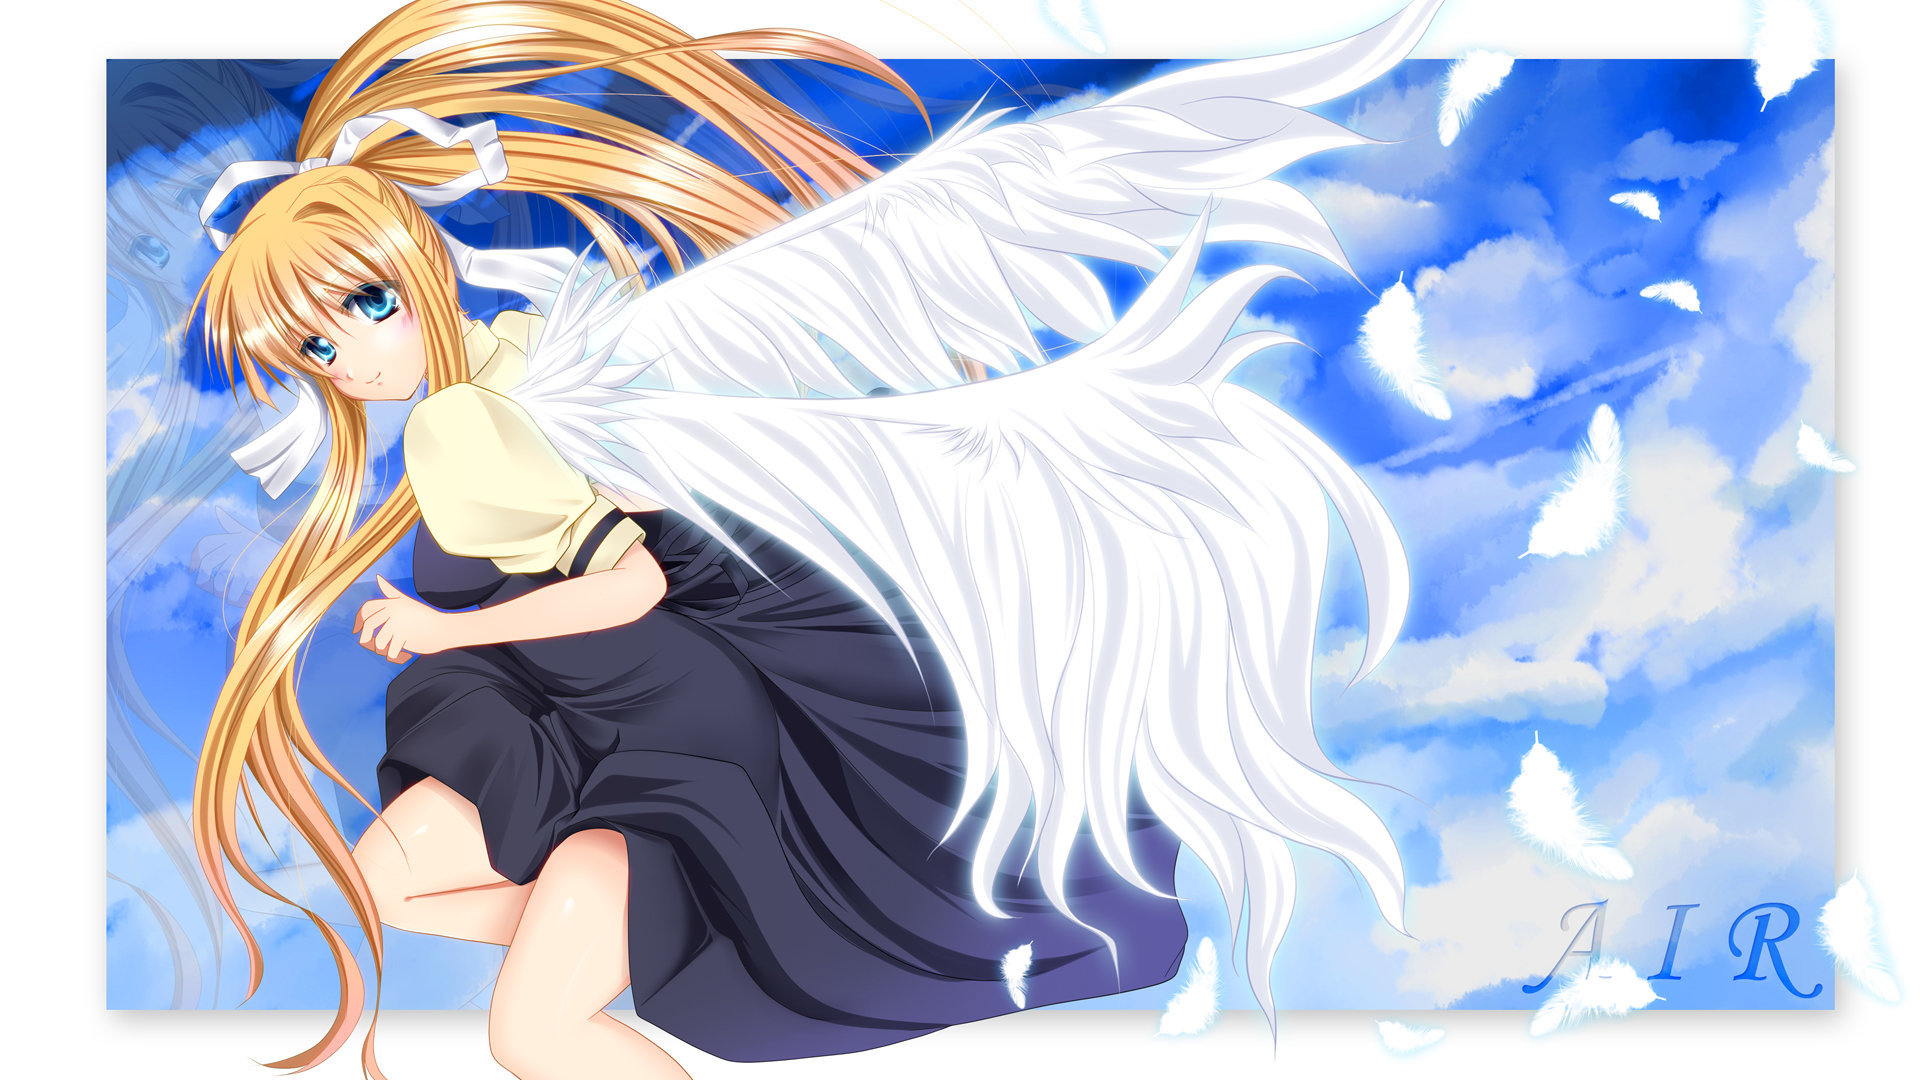 Download hd 1920x1080 Air anime PC wallpaper ID:273462 for free